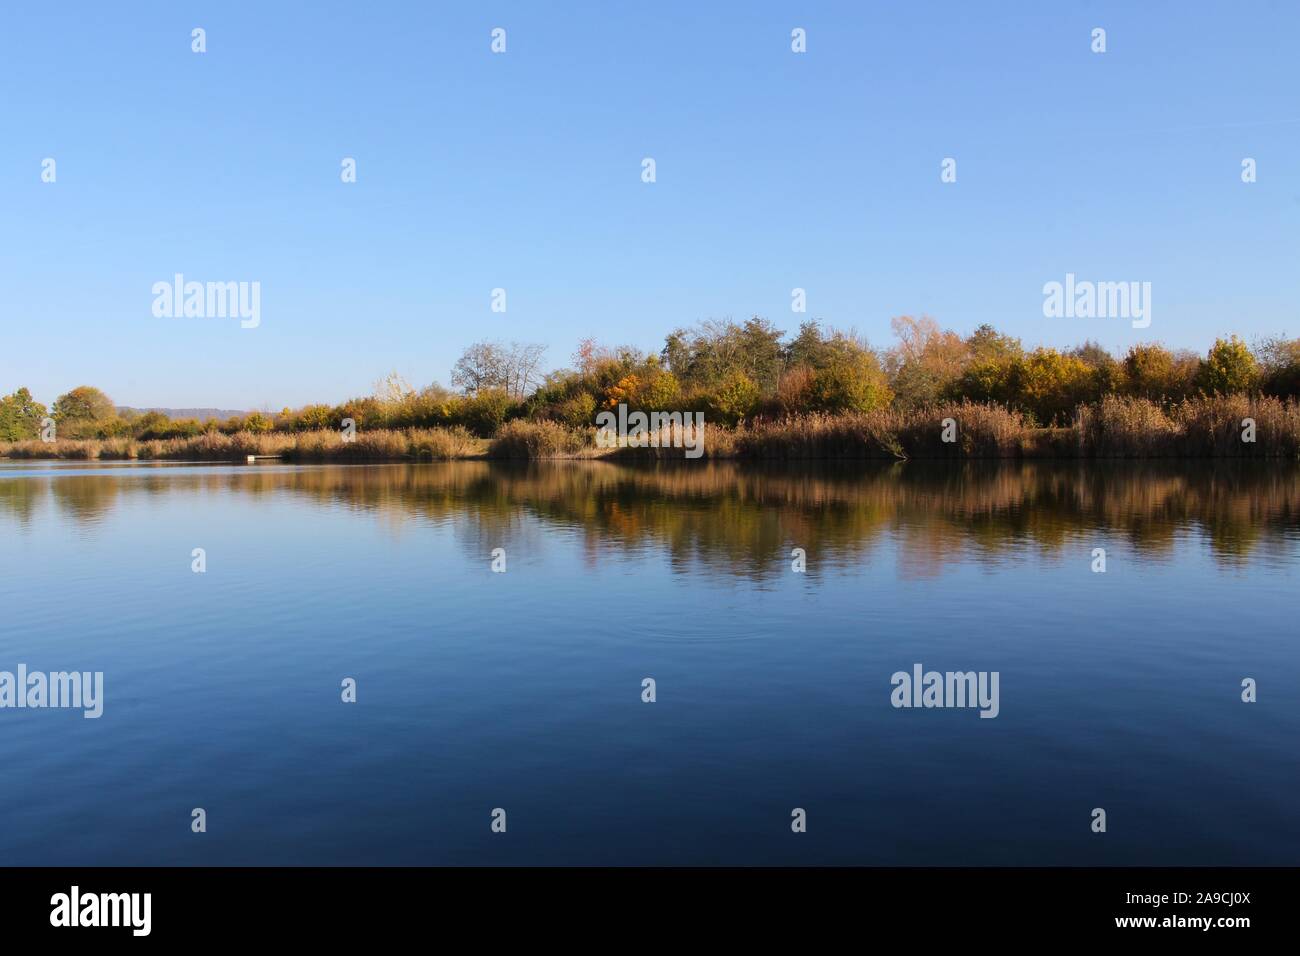 Lake shoreline reflecting symmetric in the water with blue sky Stock Photo